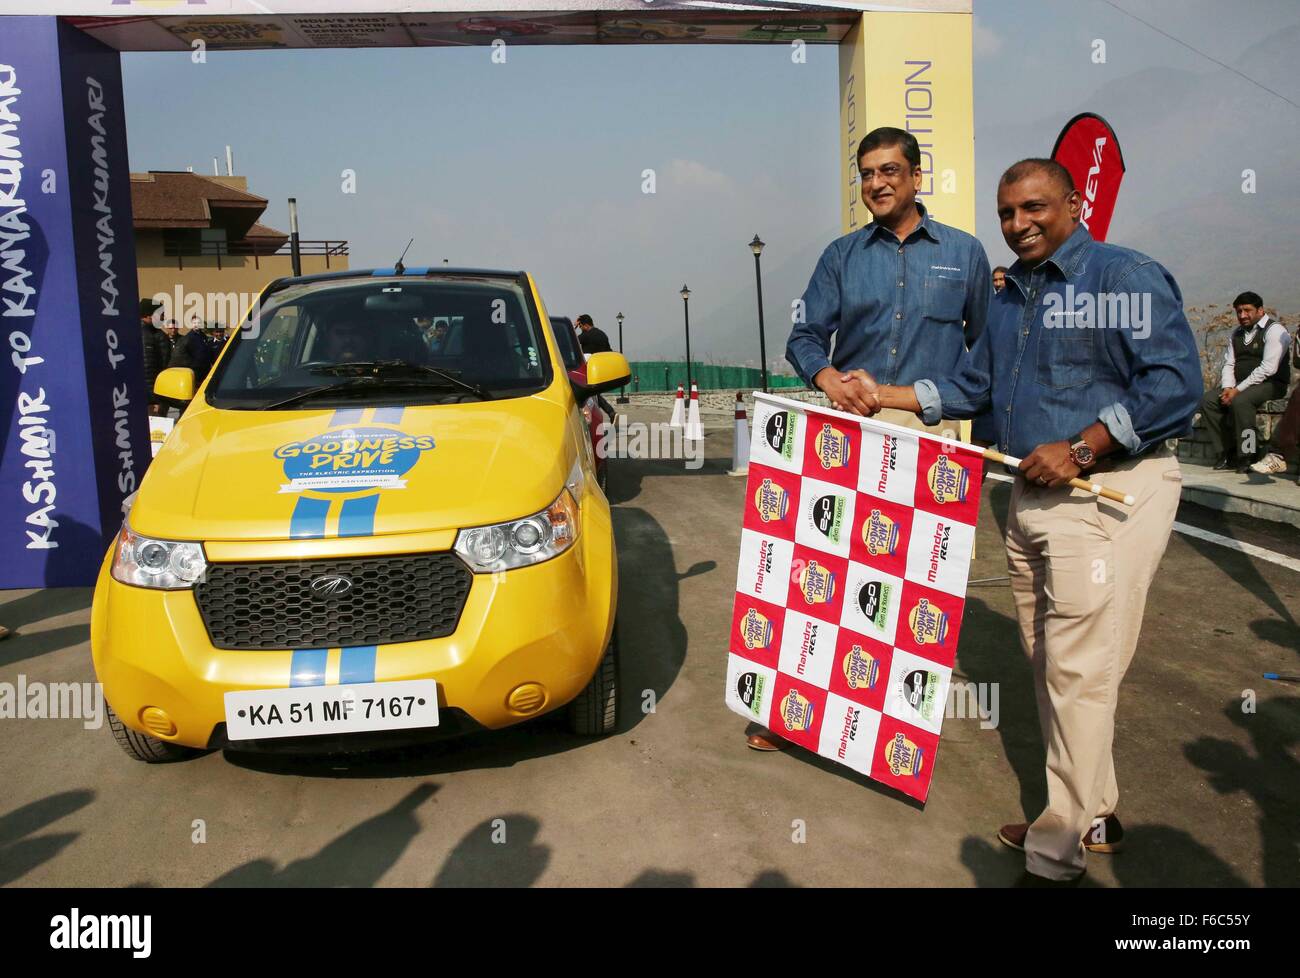 Srinagar, Indian-controlled Kashmir. 16th Nov, 2015. Aravinda De Silva (R), former cricketer of Sri Lanka, flags off India's first all-electric car expedition in Srinagar, summer capital of Indian-controlled Kashmir, Nov. 16, 2015. The first all-electric car expedition organized by Mahindra Reva Electric Vehicles Pvt Limited from Kashmir to Kanyakumari will cover a distance of over 5000 kilometers across 52 locations over a month. © Javed Dar/Xinhua/Alamy Live News Stock Photo